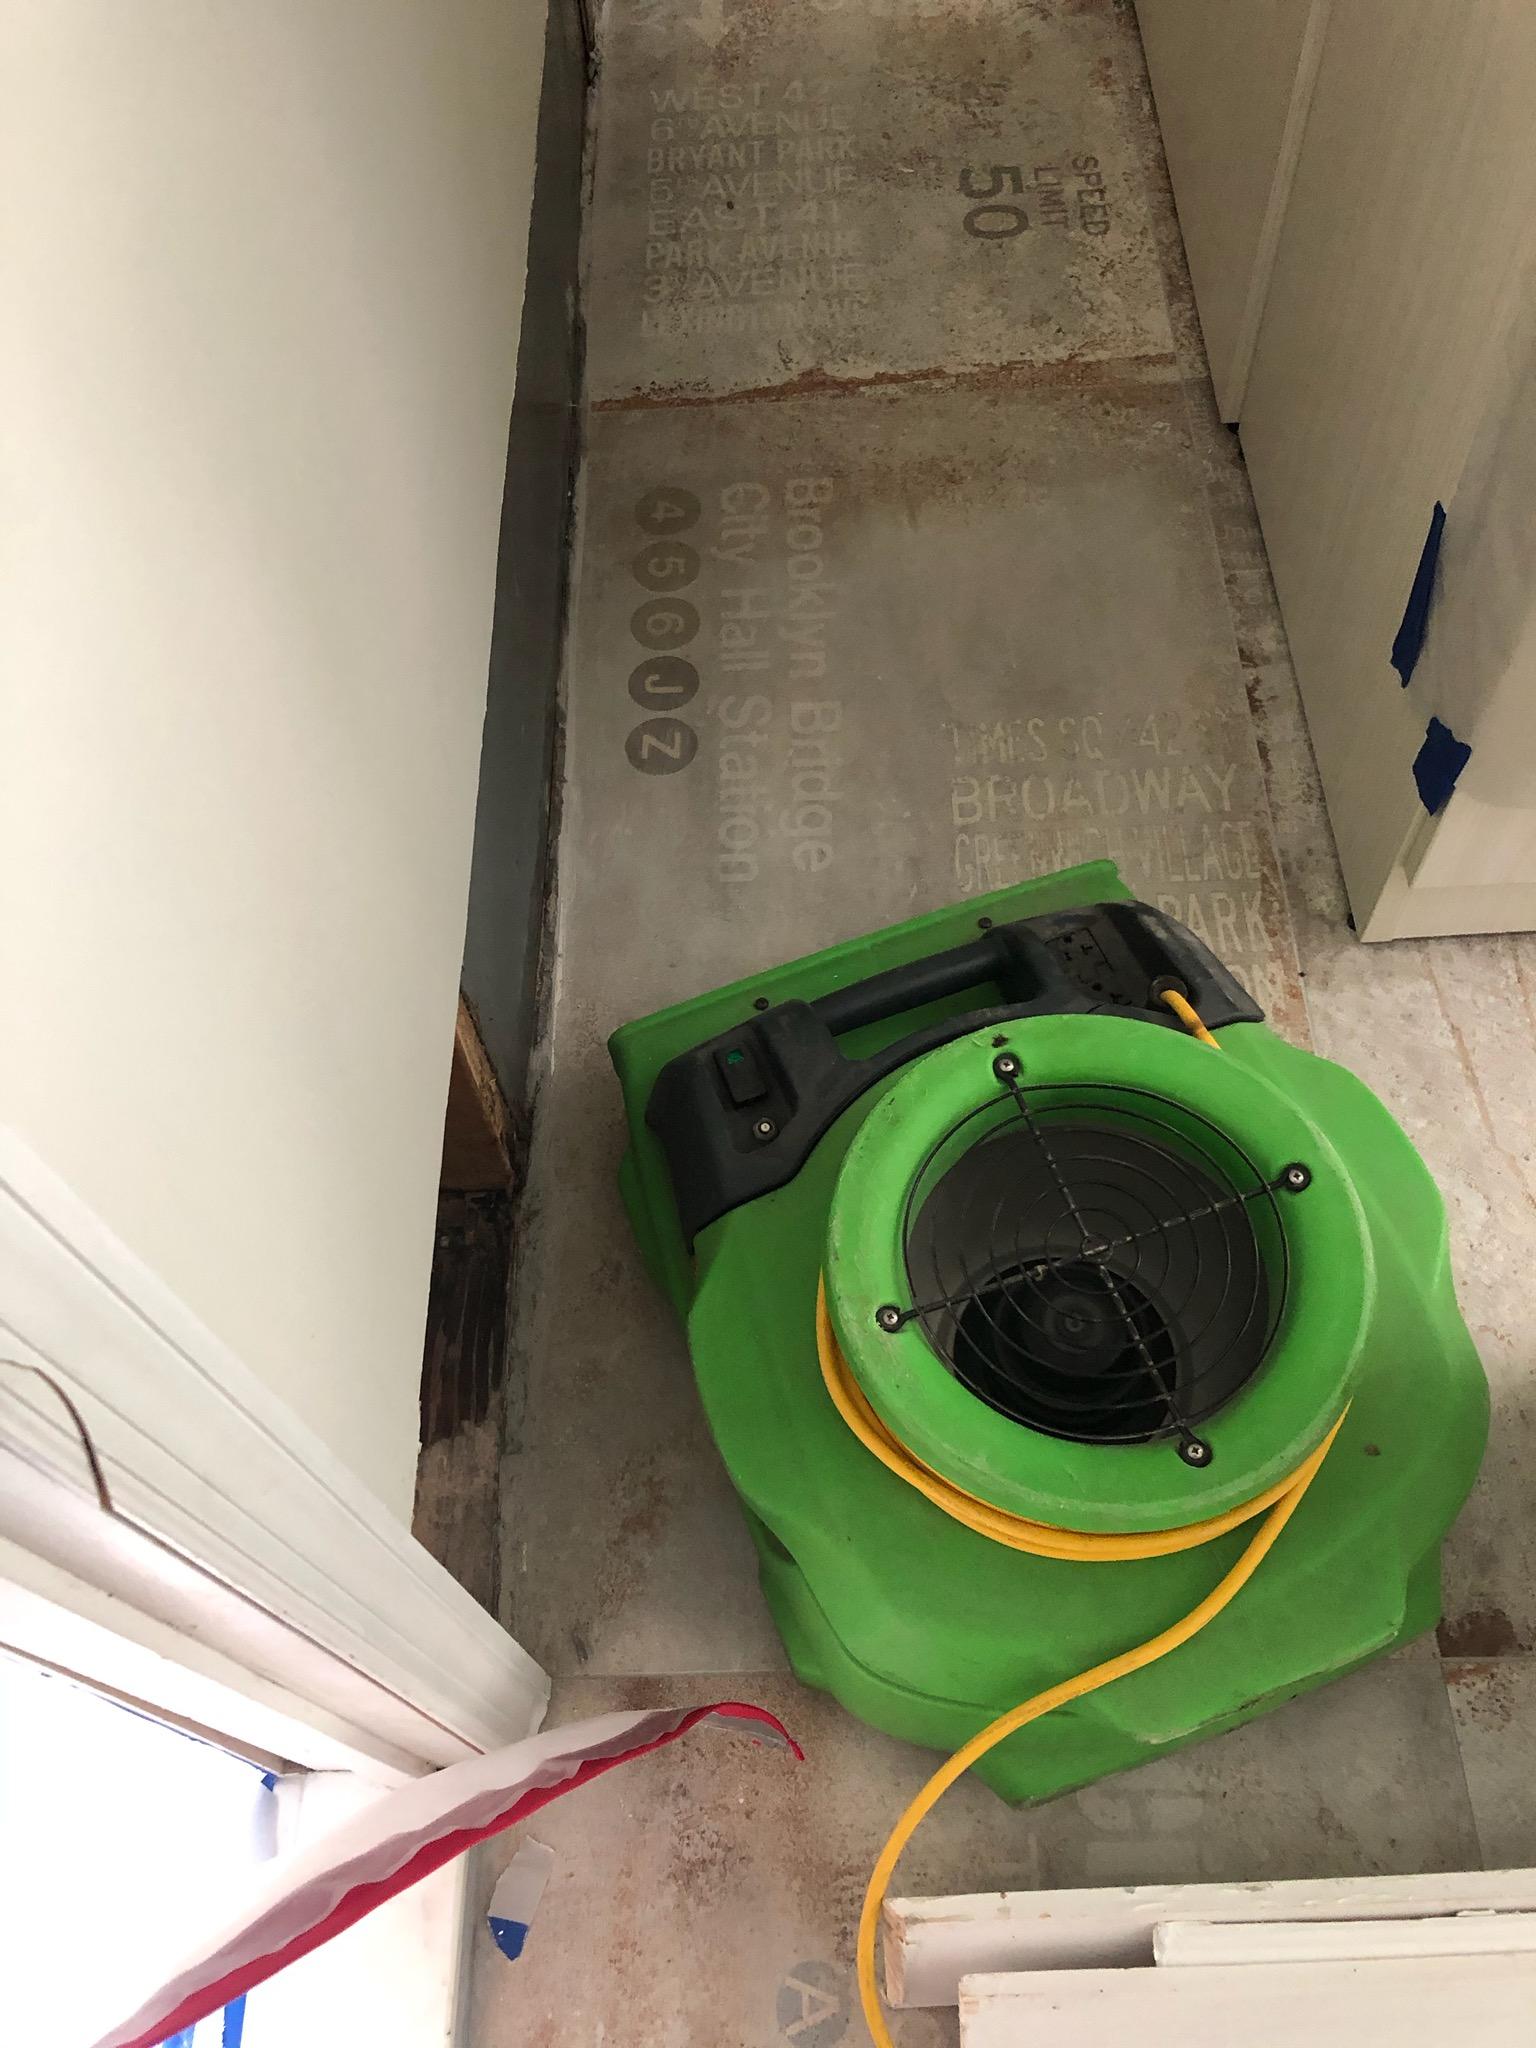 Water damage cleanup in Queens, NY is no problem for our SERVPRO of Ozone Park/Jamaica Bay team to handle!